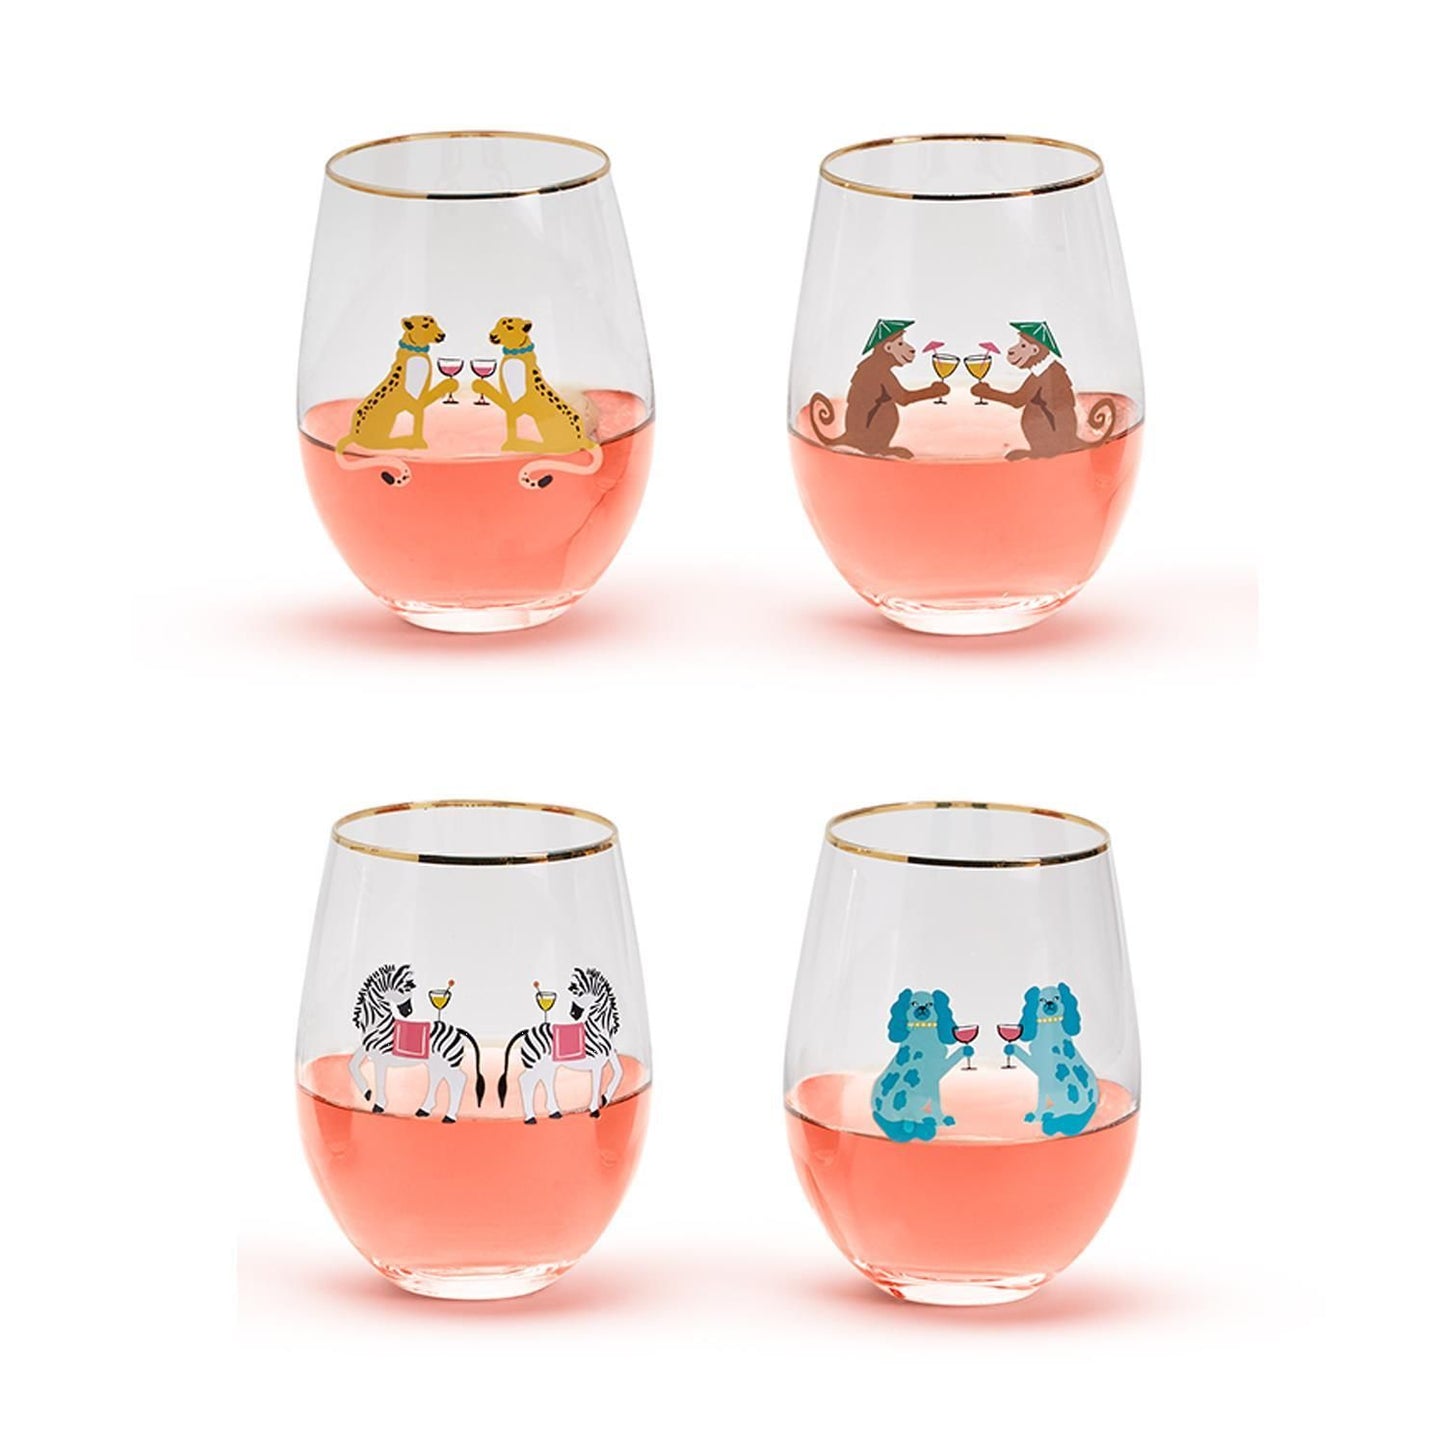 Two's Company Animal Party Set Of 4 Stemless Wine Glasses